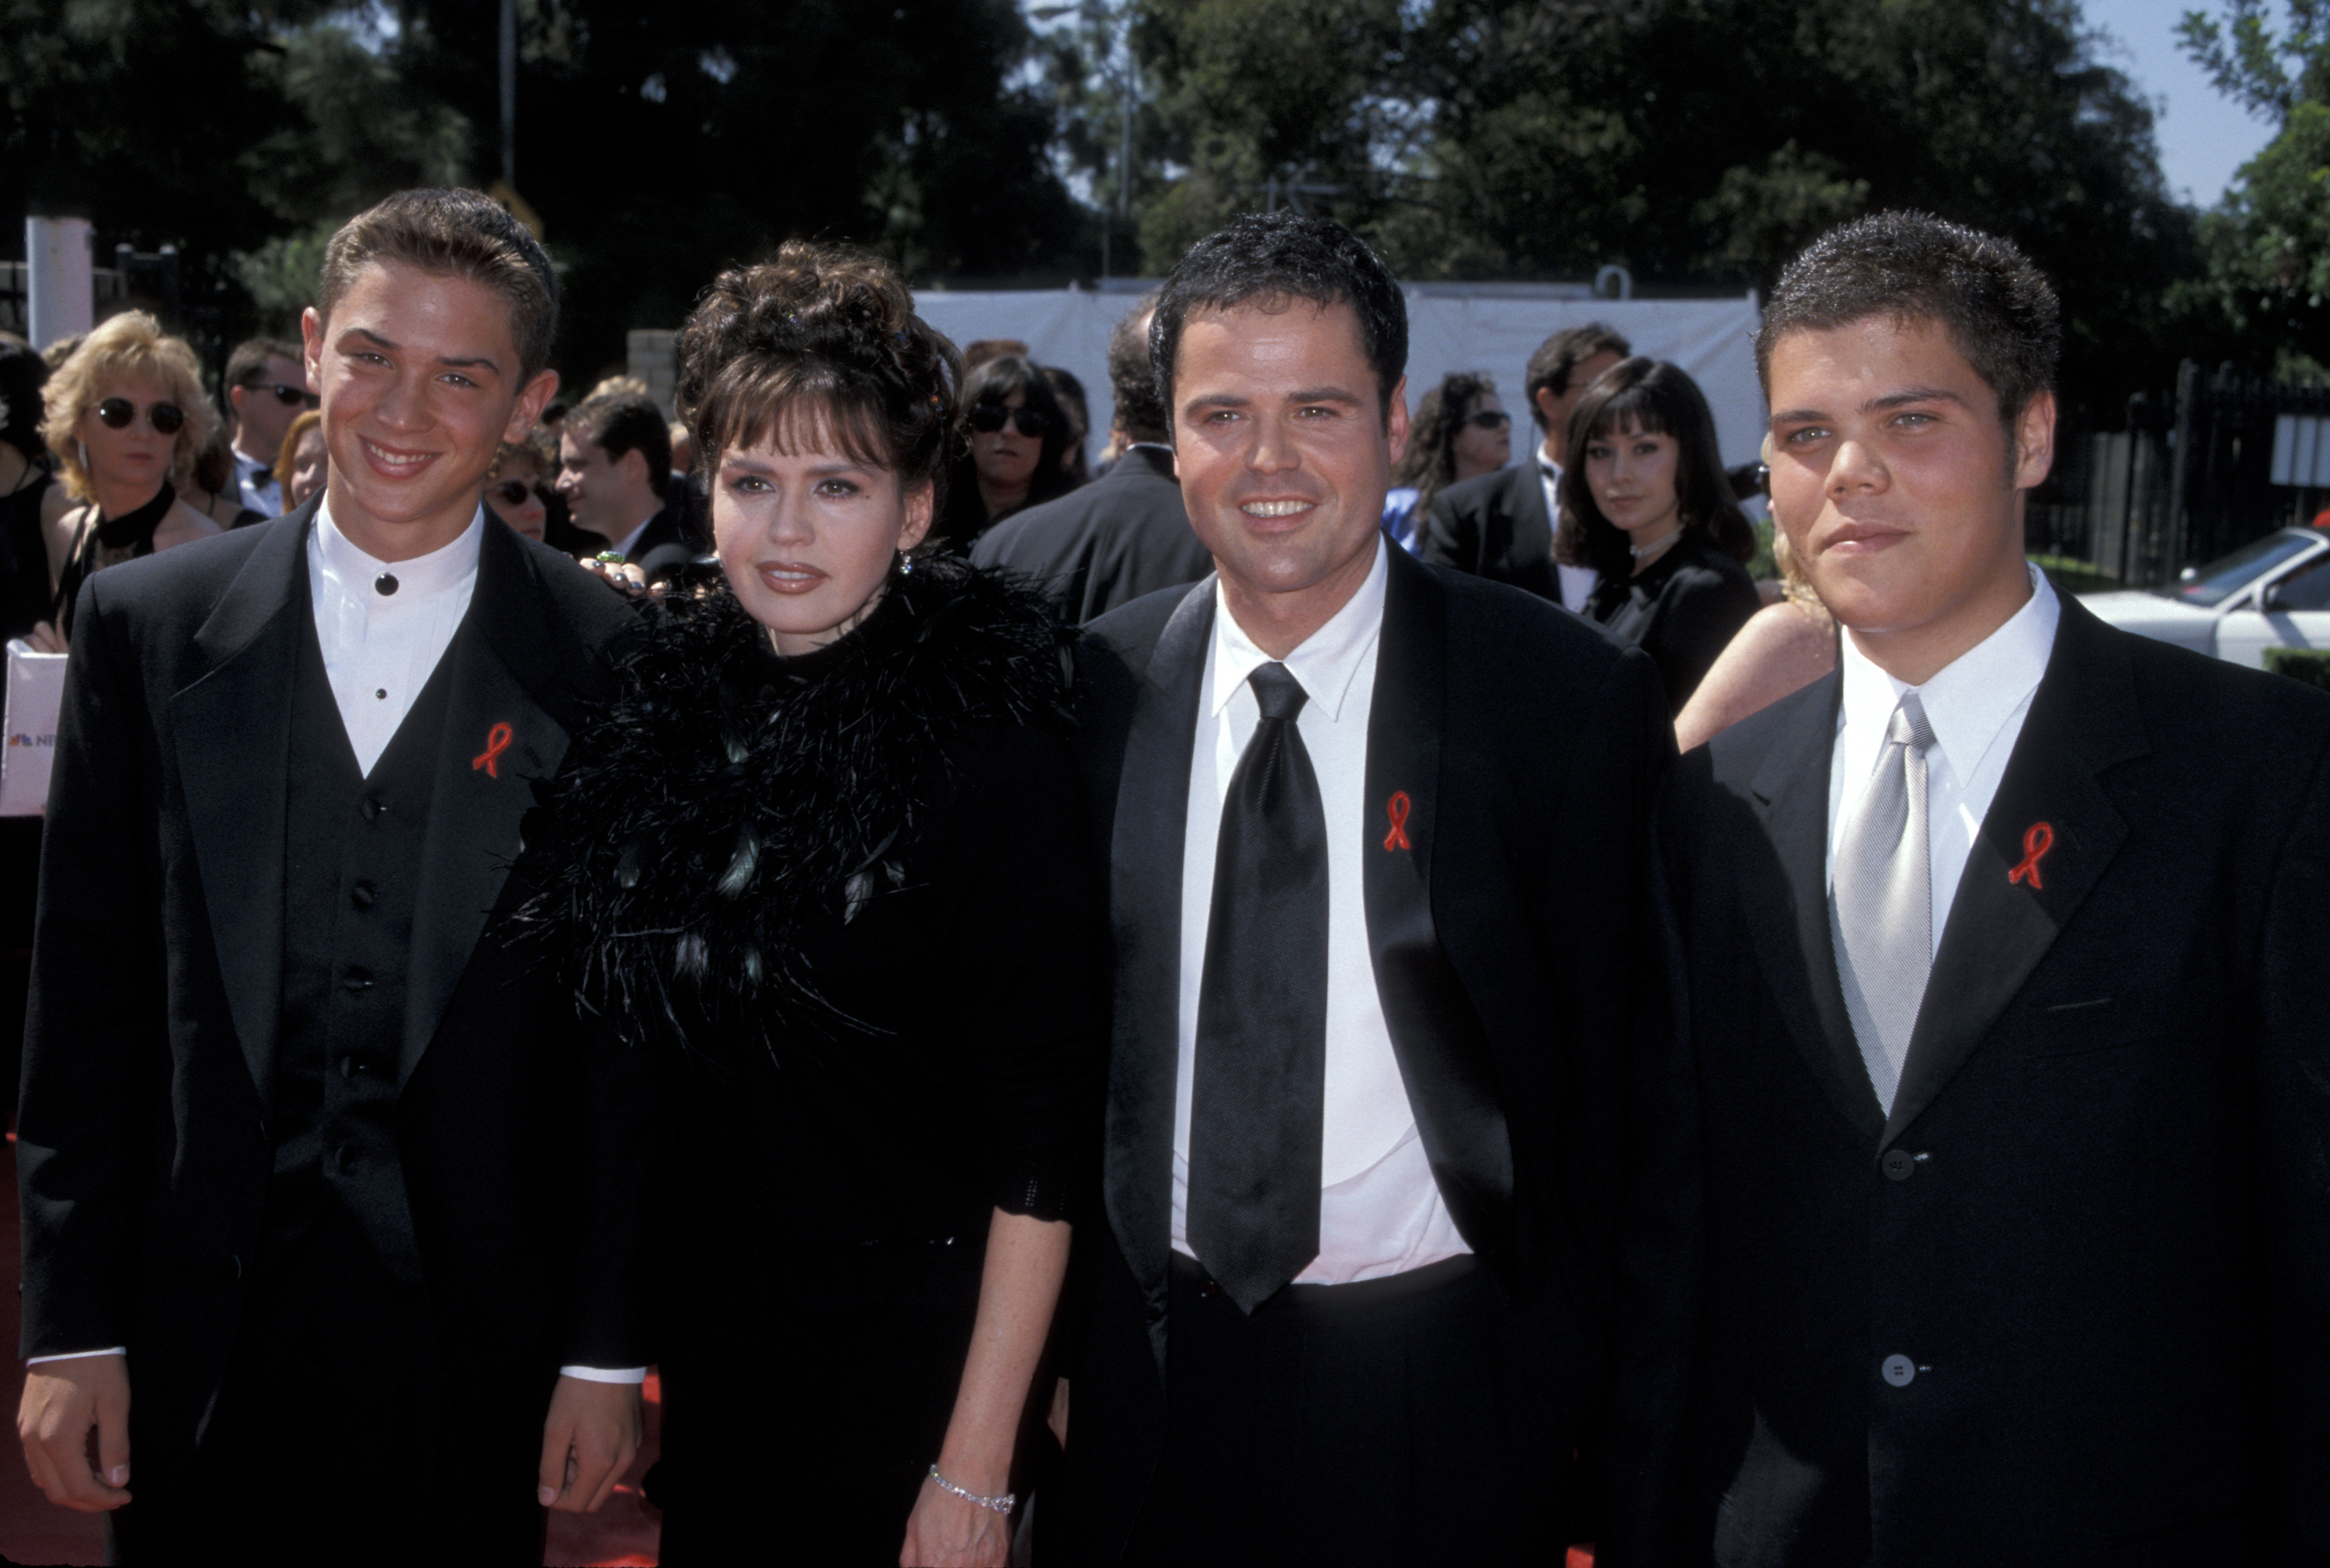 Marie Osmond, Donny Osmond, and sons during the 50th Annual Emmy Awards in Los Angeles, California, on September 13, 1998. | Source: Getty Images